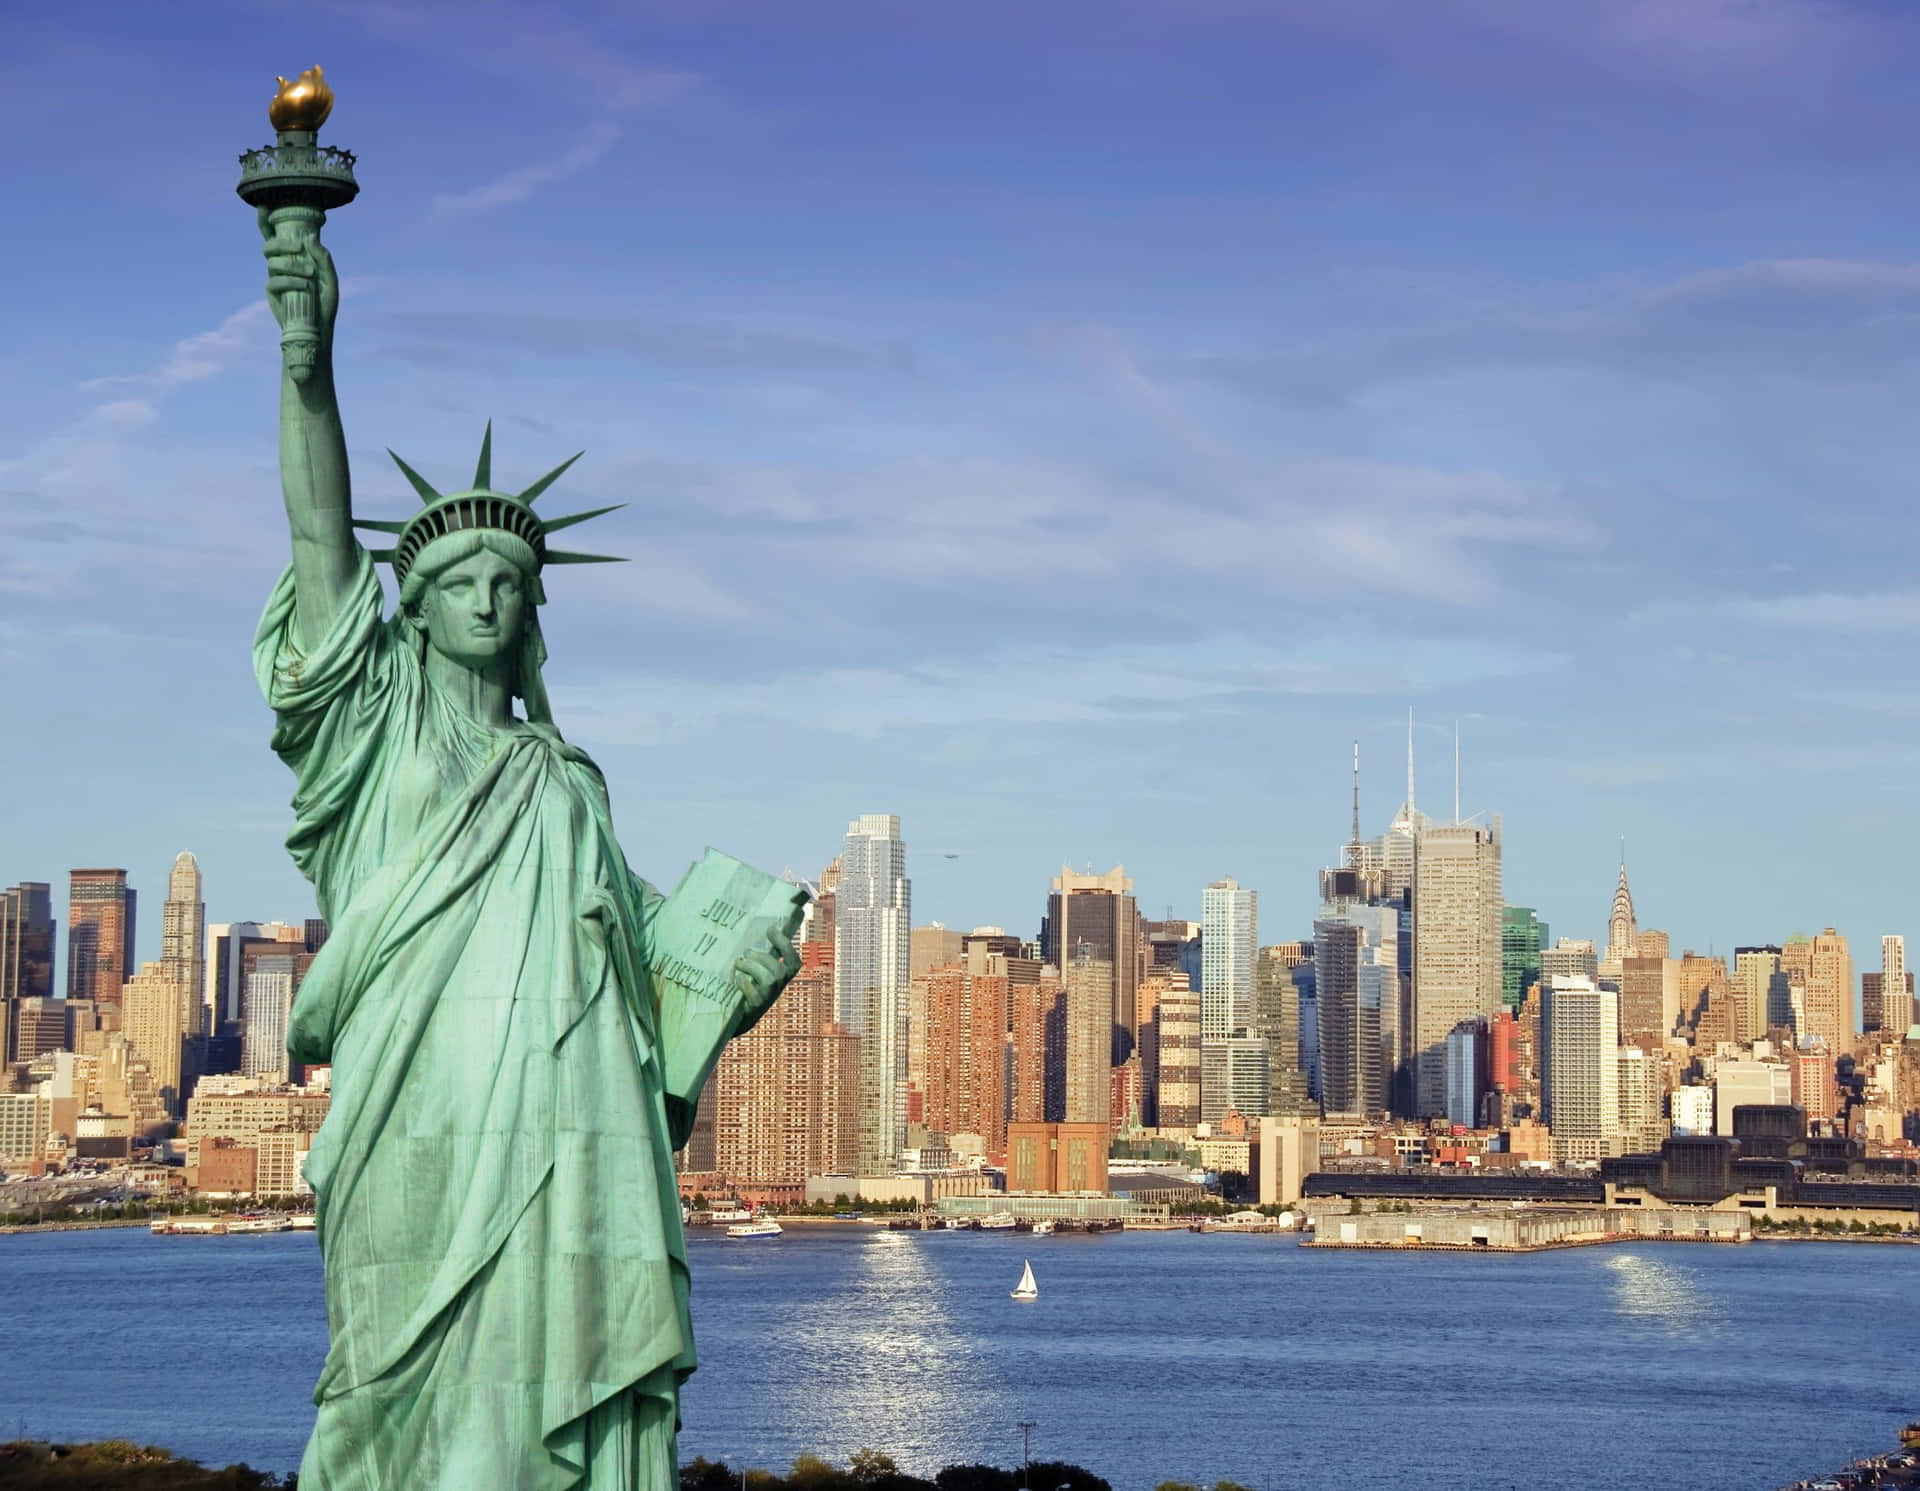 The iconic Statue of Liberty stands tall in New York harbor, standing as a symbol of freedom, democracy, and hope.